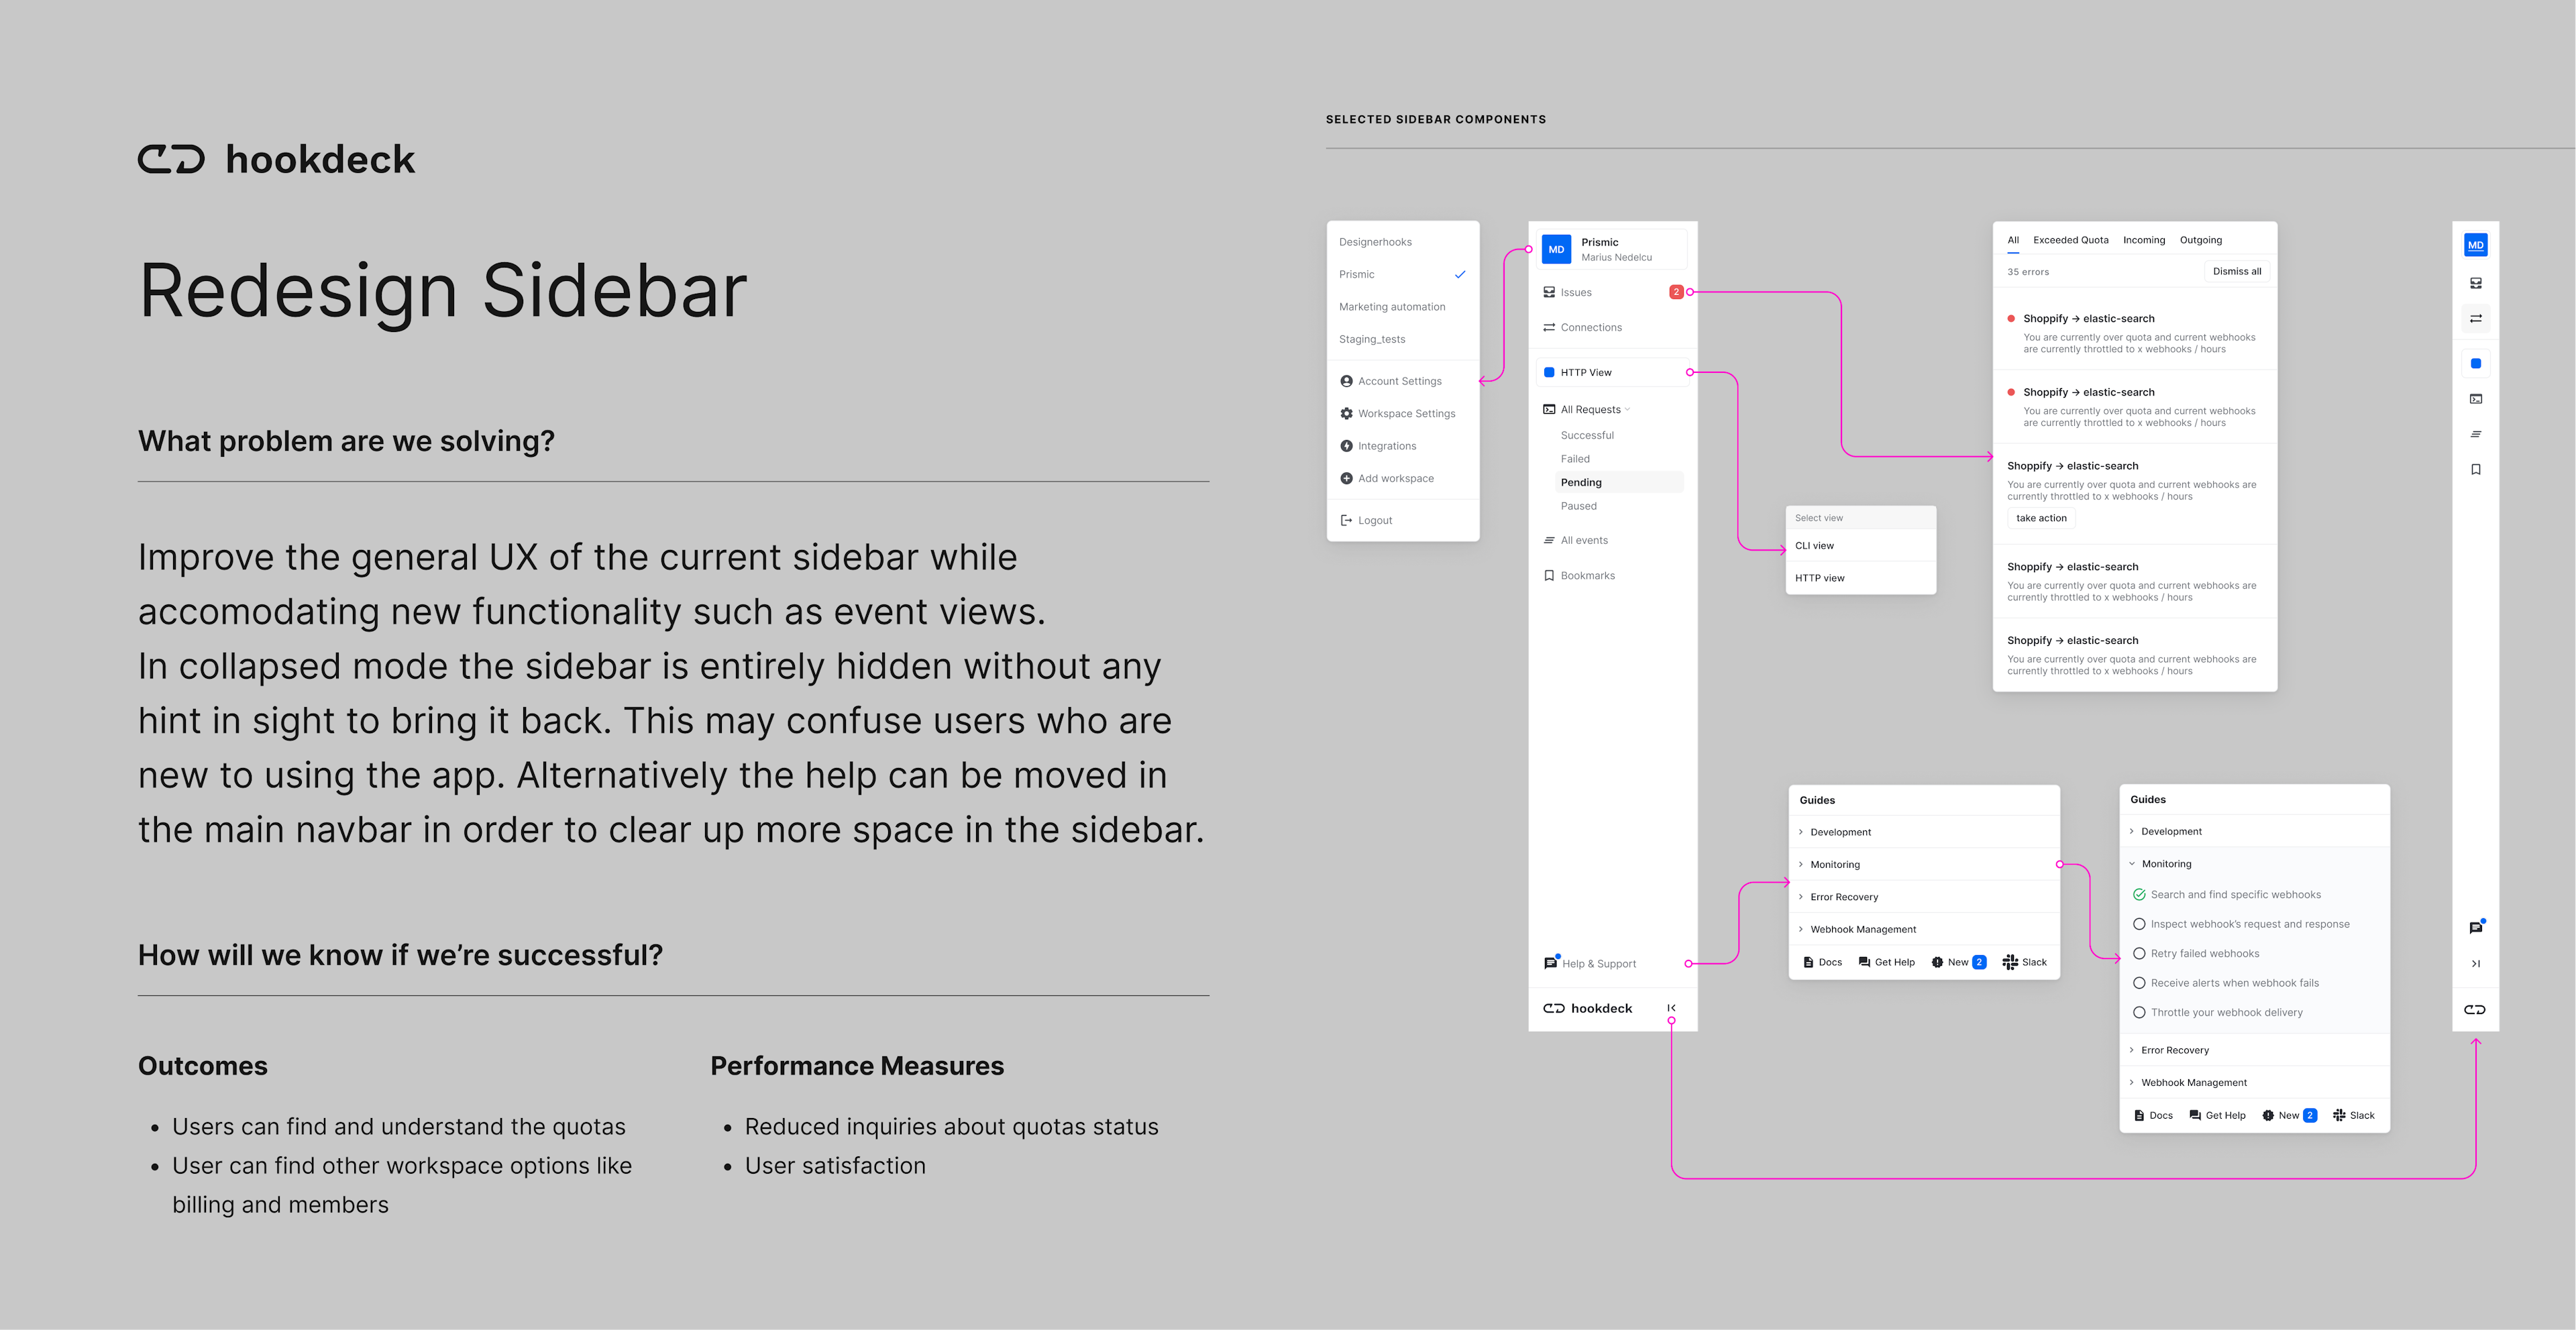 PREVIEW_3: Redesign Sidebar